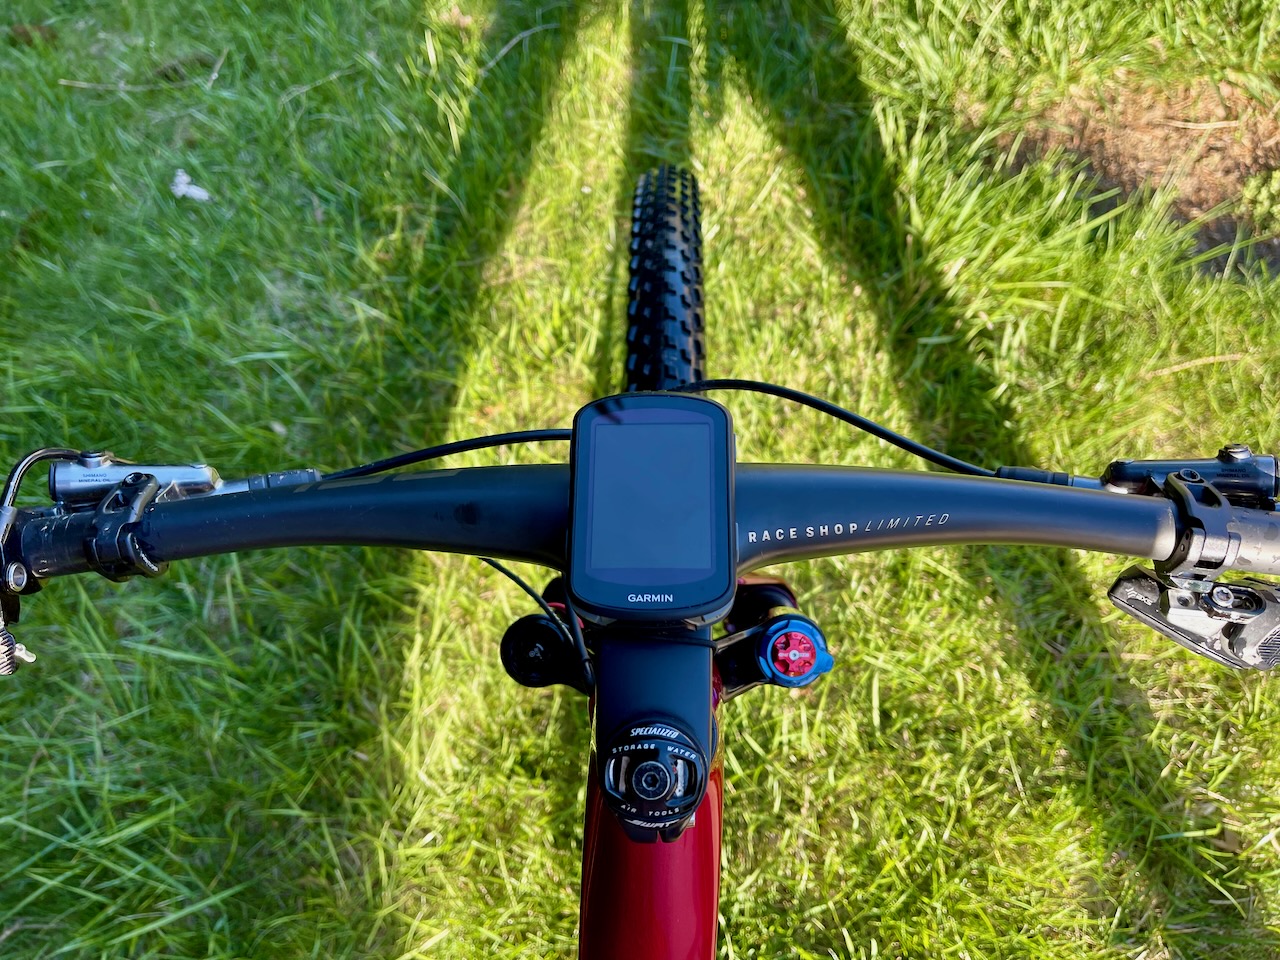 Garmin Edge 540 and 840 Series Update Features and Introduces Solar Options  - Bikerumor